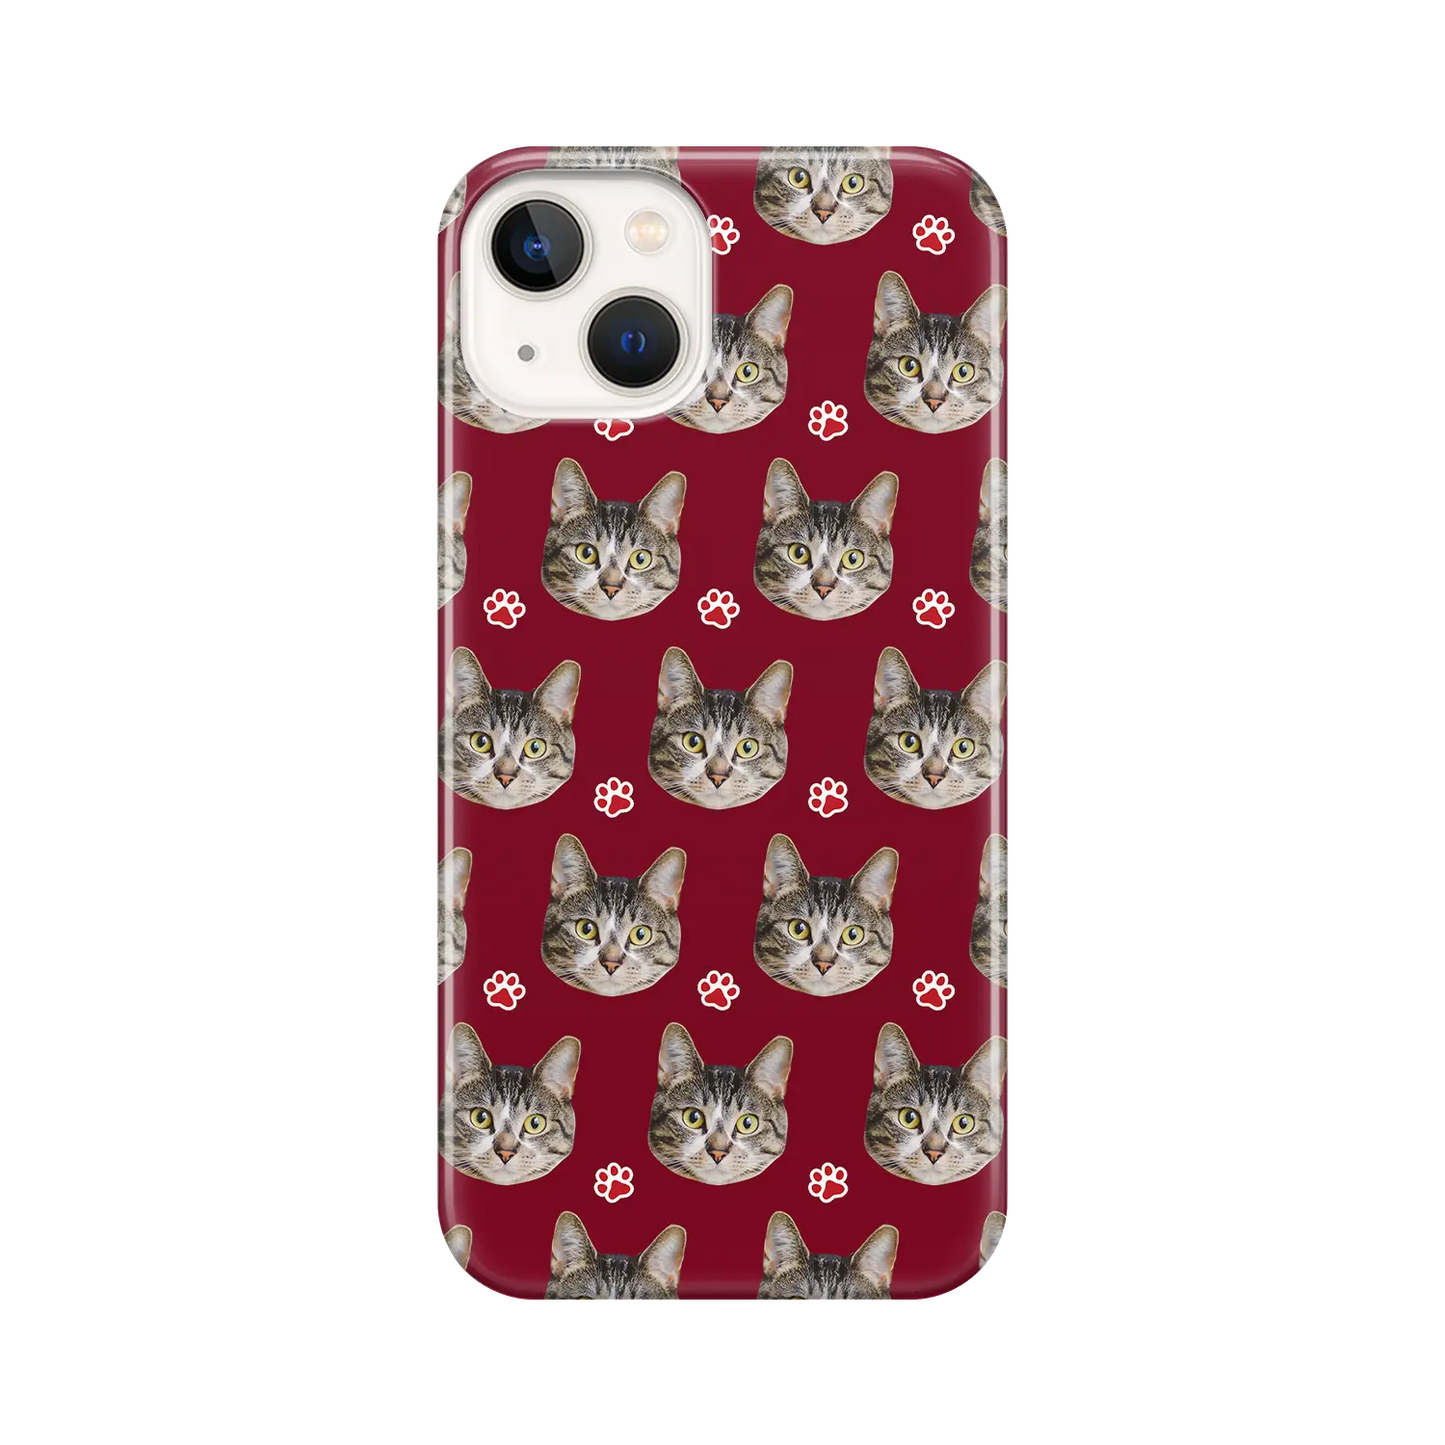 Face & Paws - Personalised iPhone Case